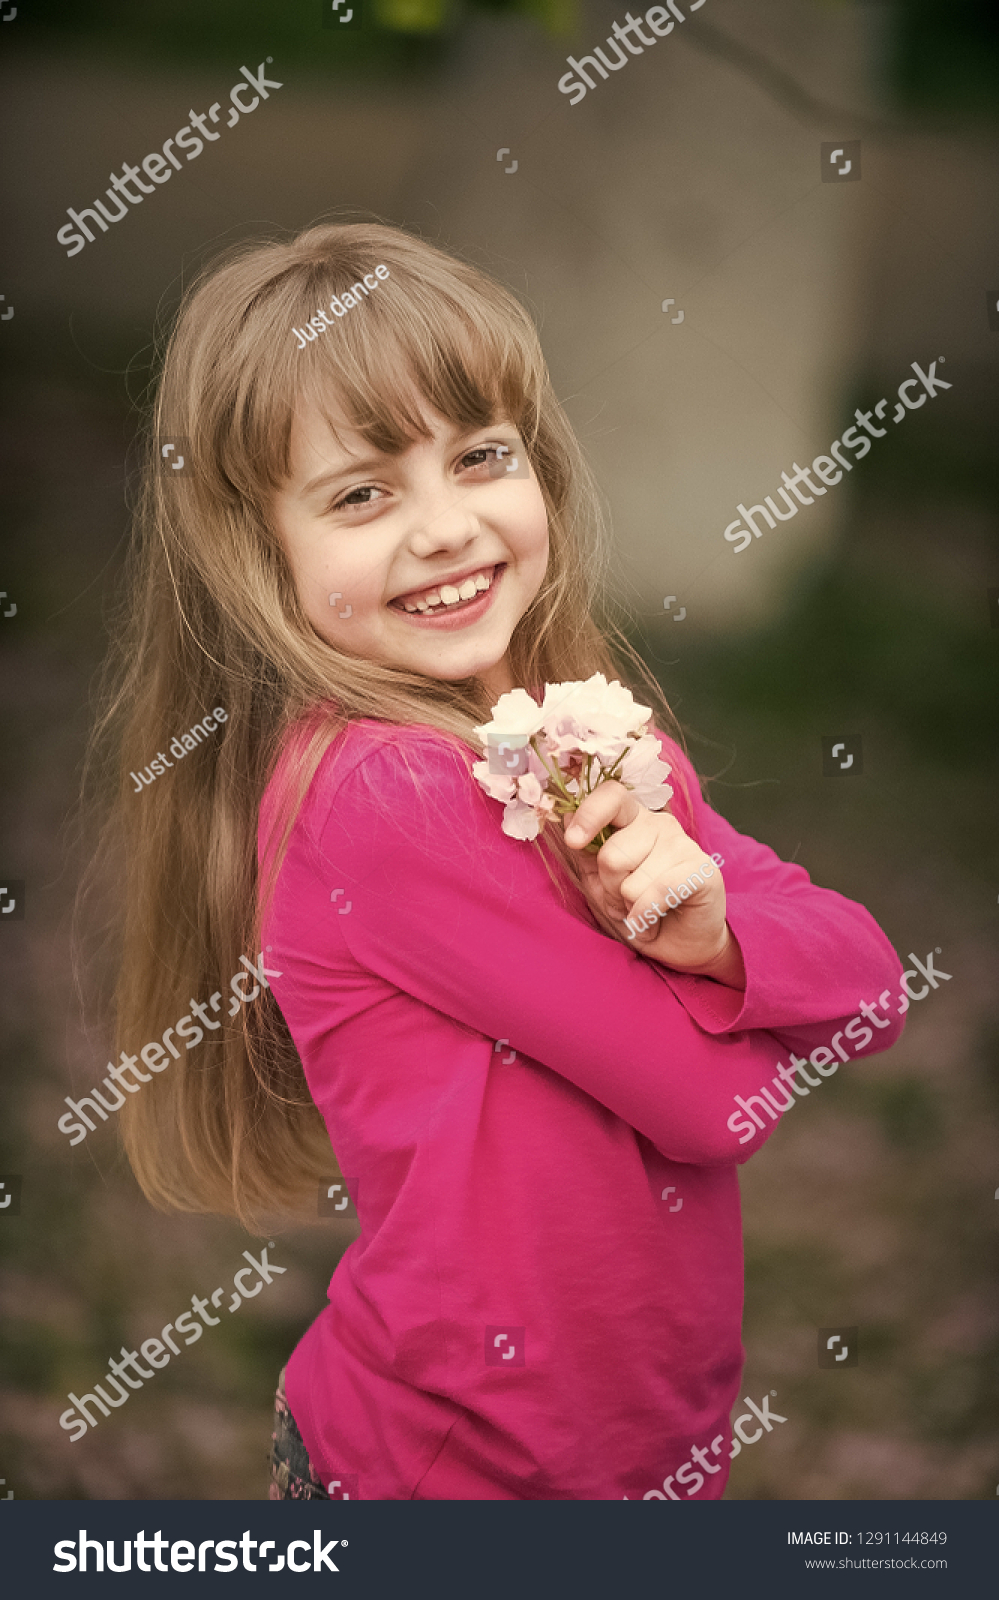 Small Baby Girl Cute Child Adorable Stock Photo Edit Now 1291144849